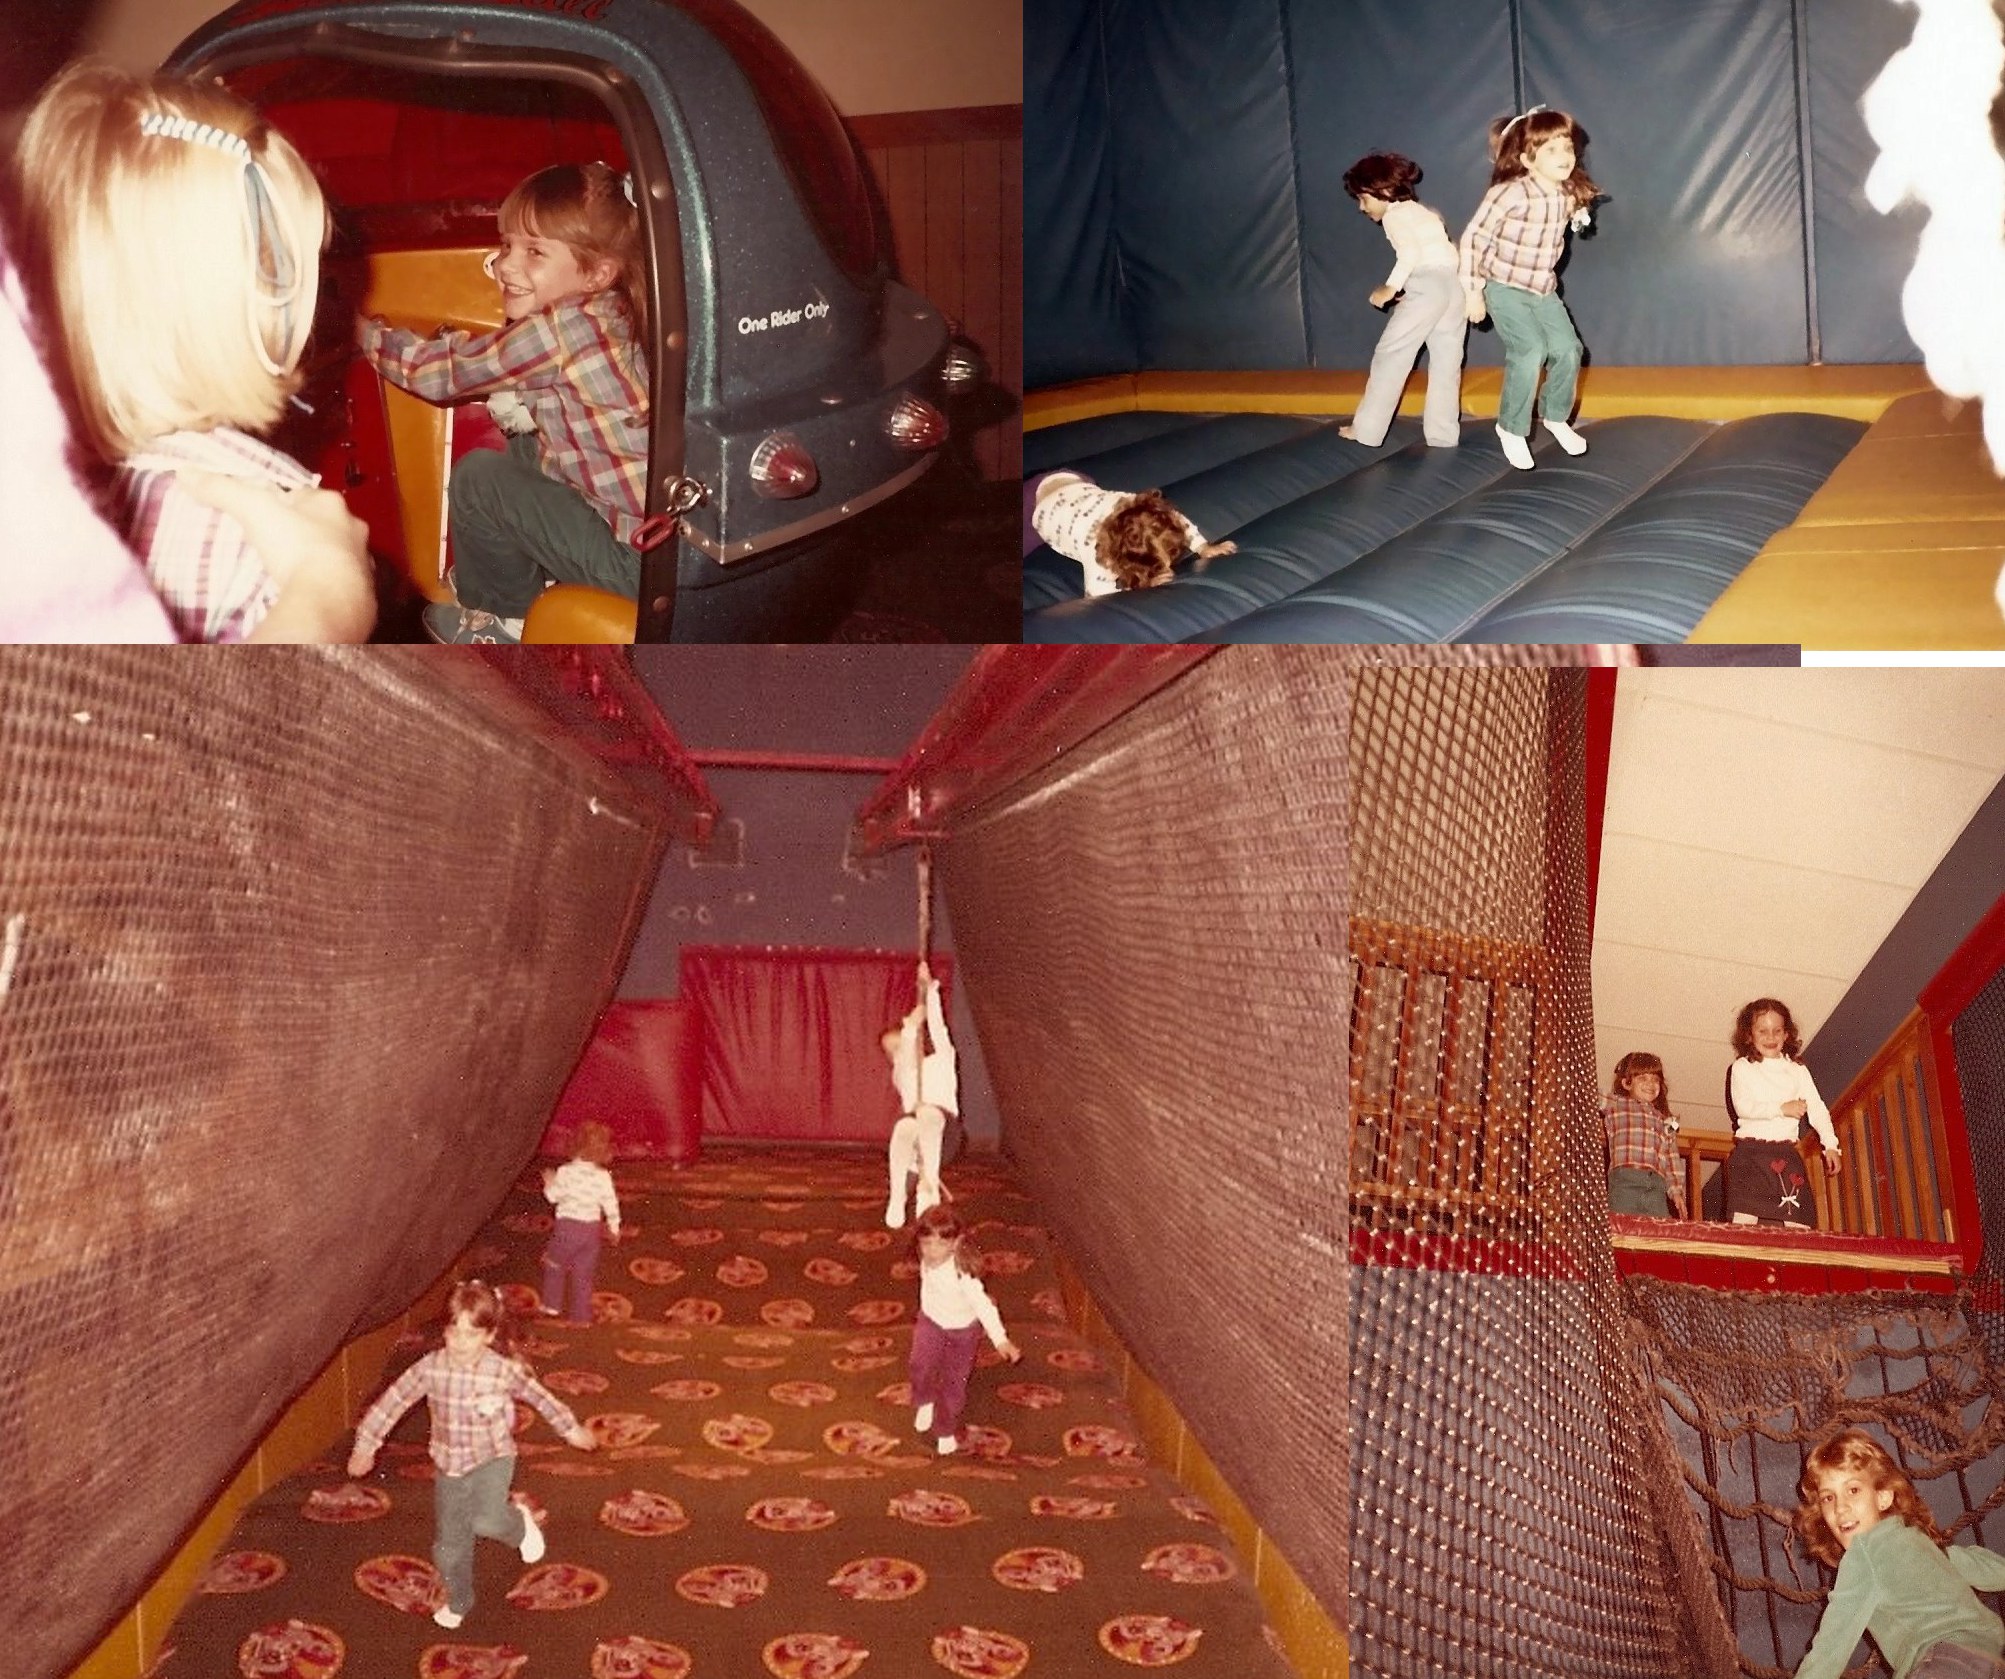 Showbiz Pizza actually involved being ACTIVE- bridges over the ball pits, jumpalines, rides, climbing, sliding, and of course the skeeball